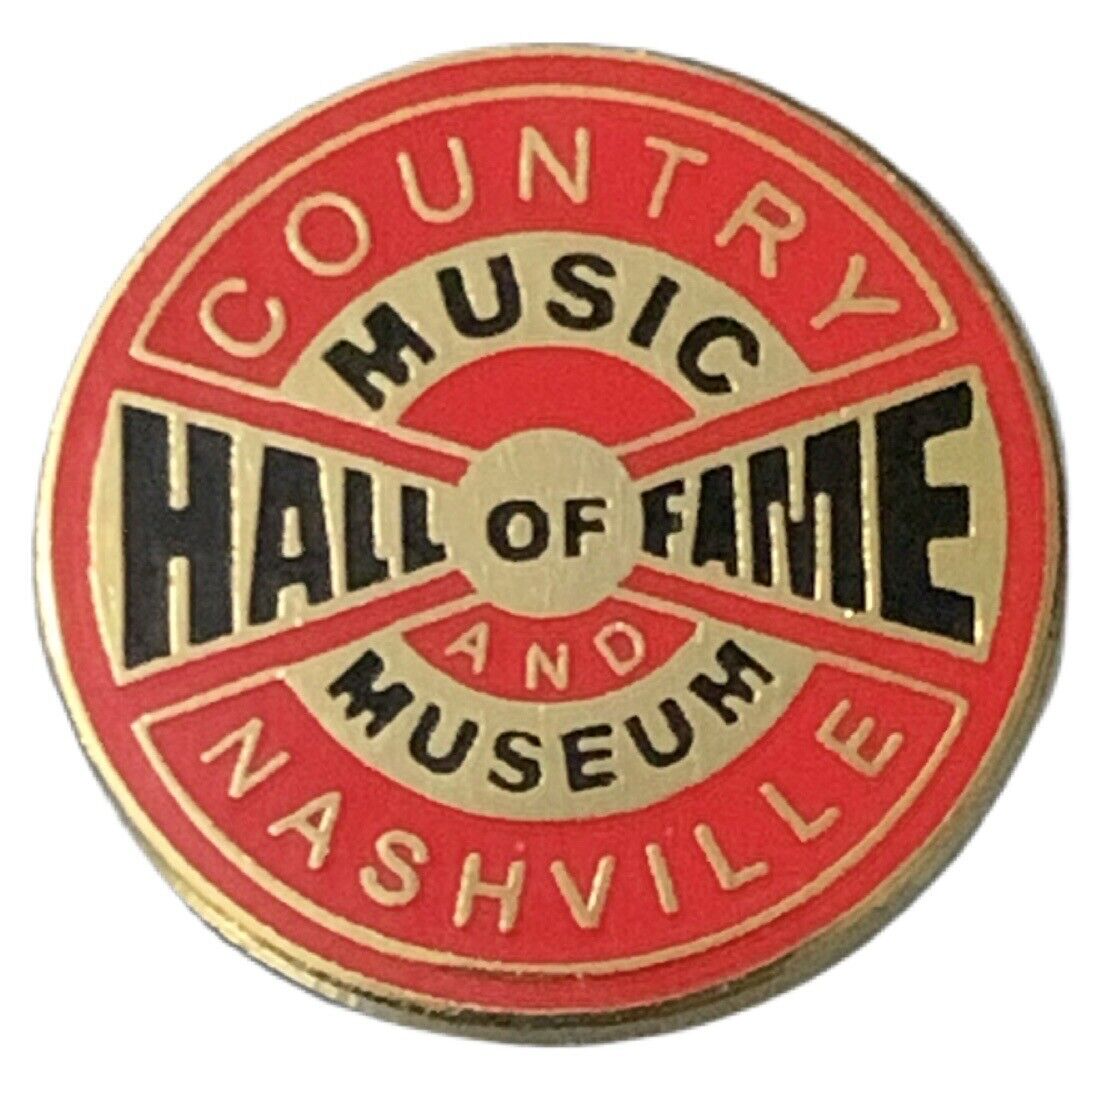 Country Music Hall of Fame and Museum Nashville Tennessee Travel Souvenir Pin